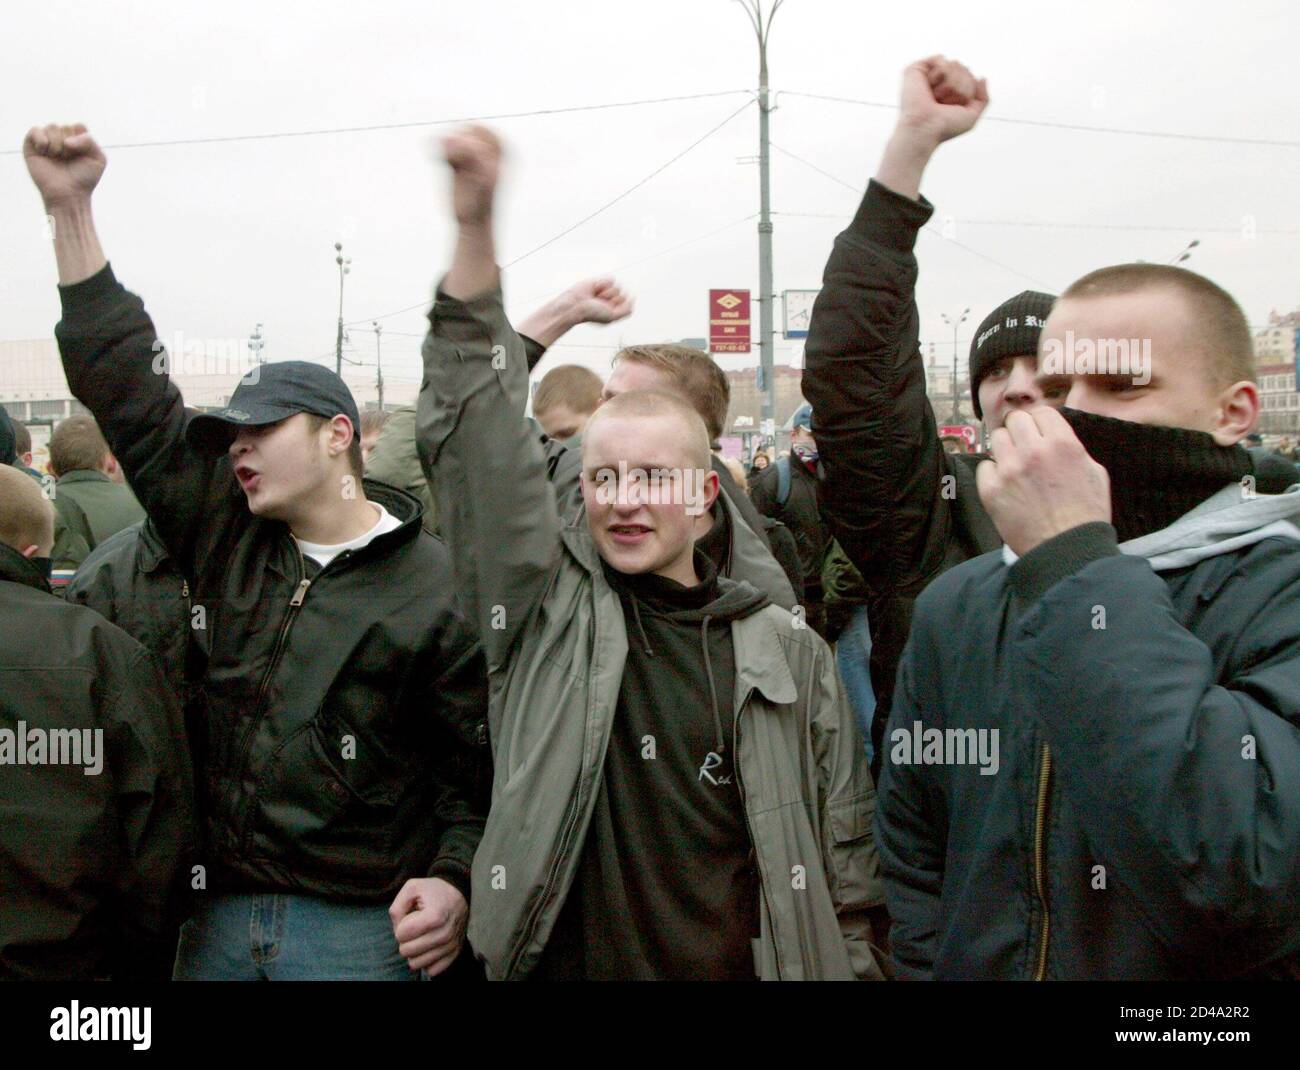 Russian youths shout slogans and wave fists as they picket in central Moscow, March 16, 2004. About a hundred picketers gathered in central Moscow on Tuesday to protest against what they called 'illegal immigration'. REUTERS/Sergei Karpukhin  cvi/JV Stock Photo